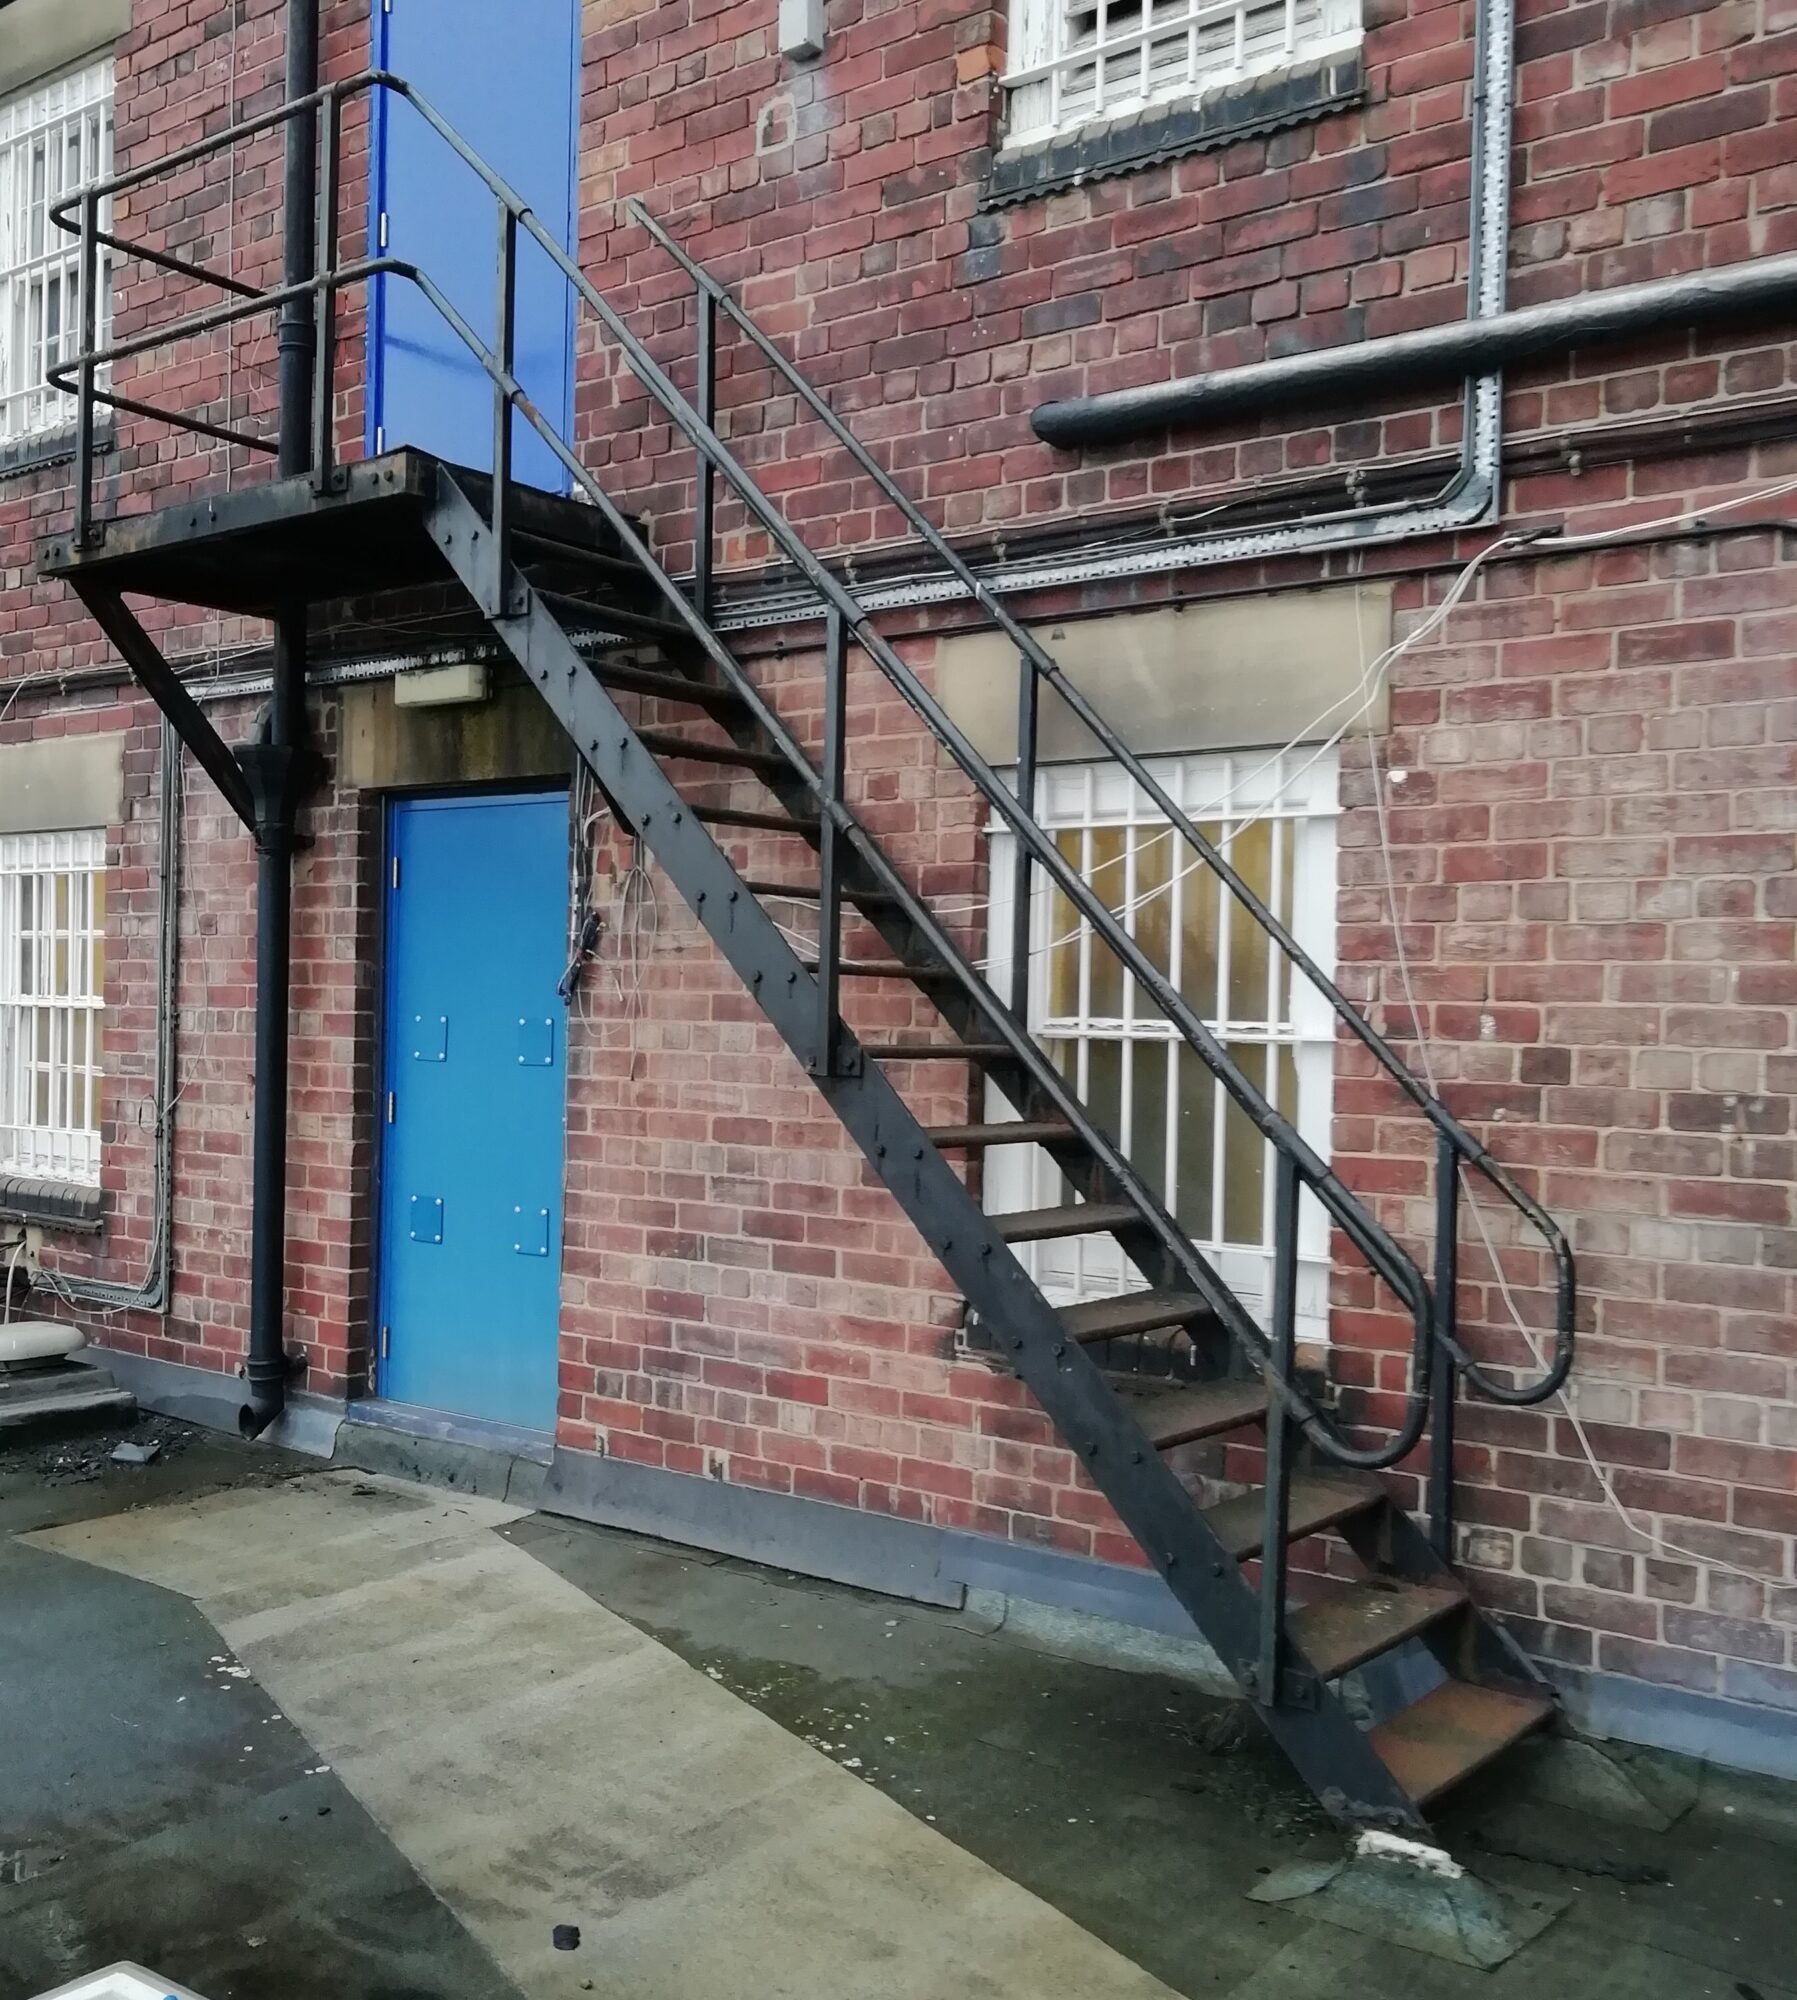 Inspection of 2 Staircases, Sheffield, South Yorkshire 1